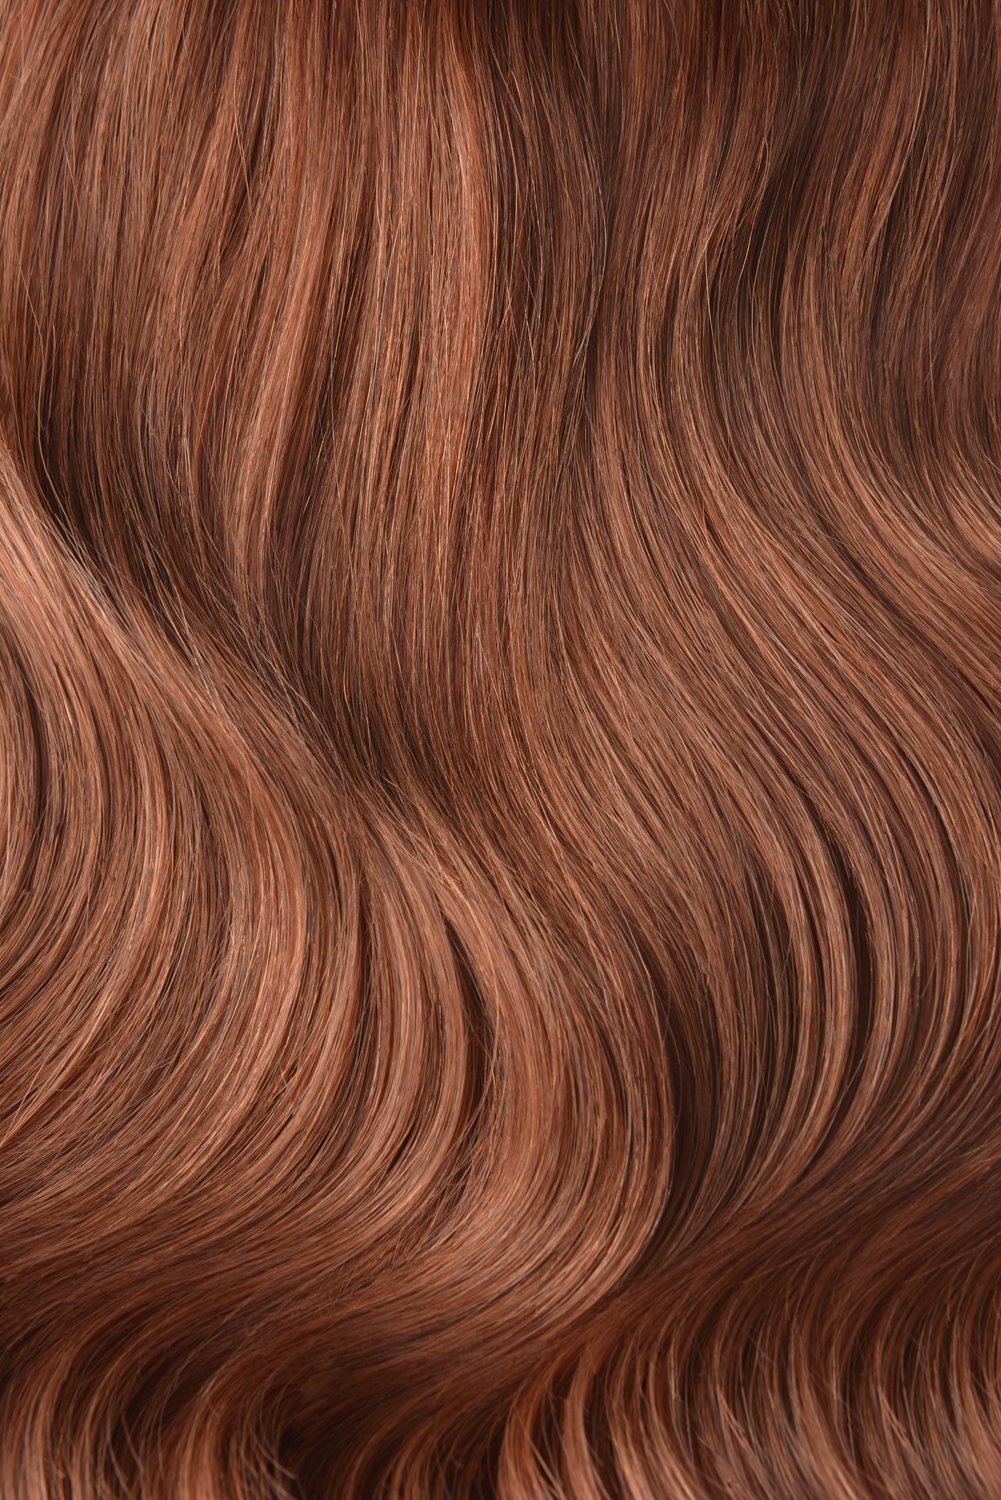 Double Wefted Full Head Remy Clip in Human Hair Extensions - Dark Auburn/Copper Red (#33) Double wefted full head cliphair 